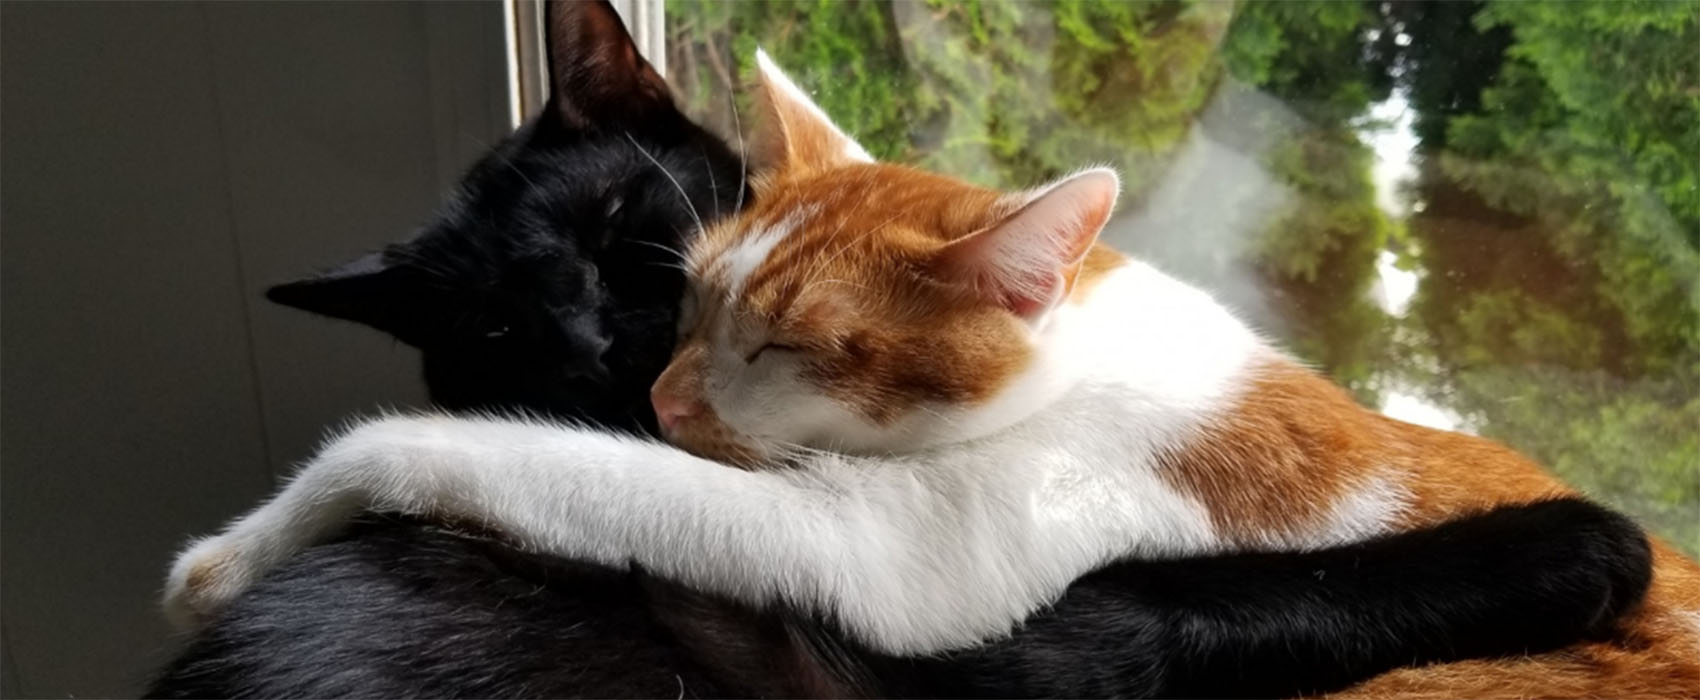 Black and orange cat hugging in front of window with evergreen trees outside.